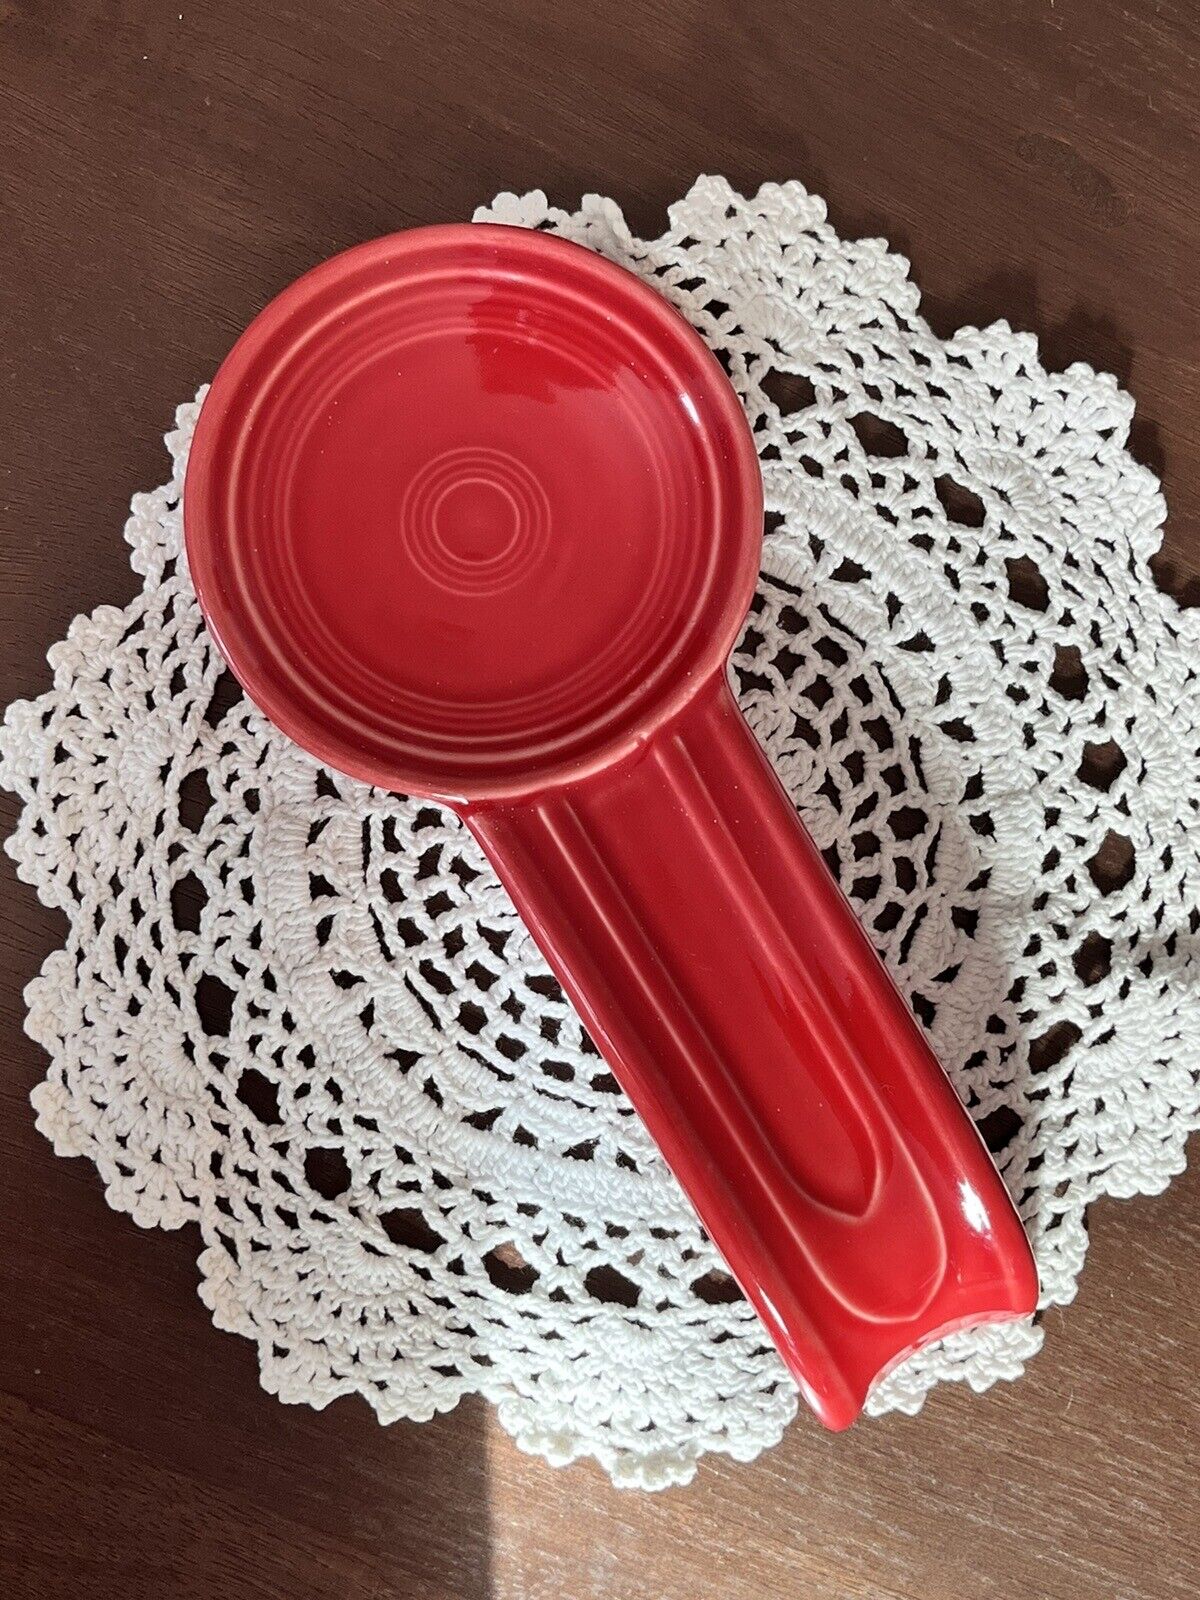 Scarlet Red Homer Laughlin Fiesta Spoon Rest Made in USA